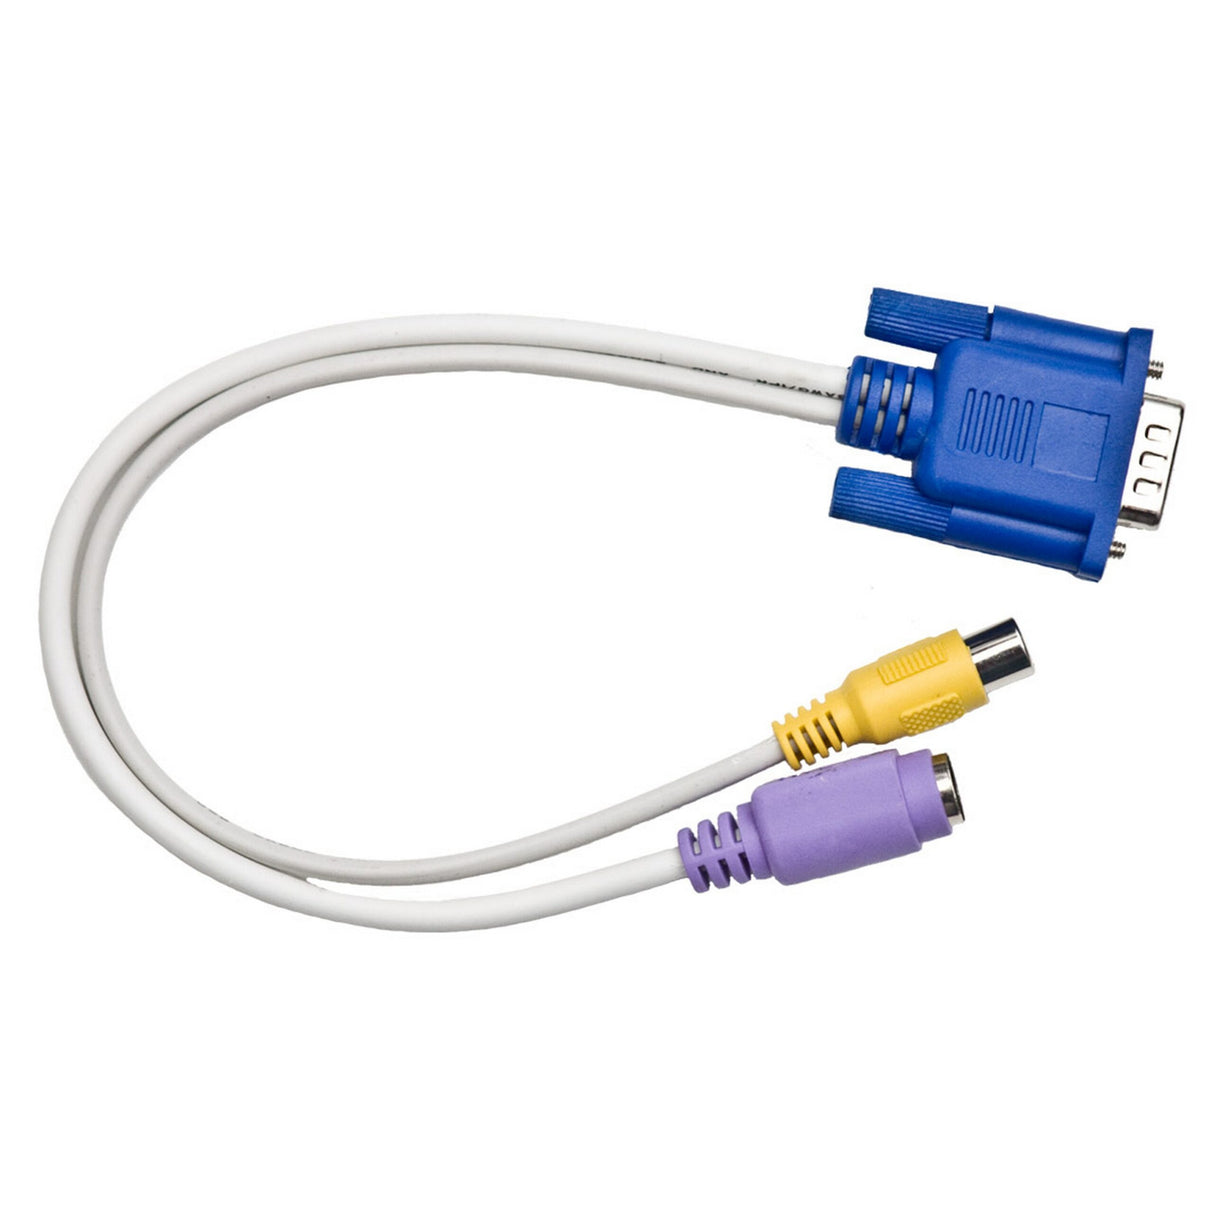 Intelix FLX-RBOCB Composite and S-Video to VGA Adaptor Cable for FLX-RI4 Cards